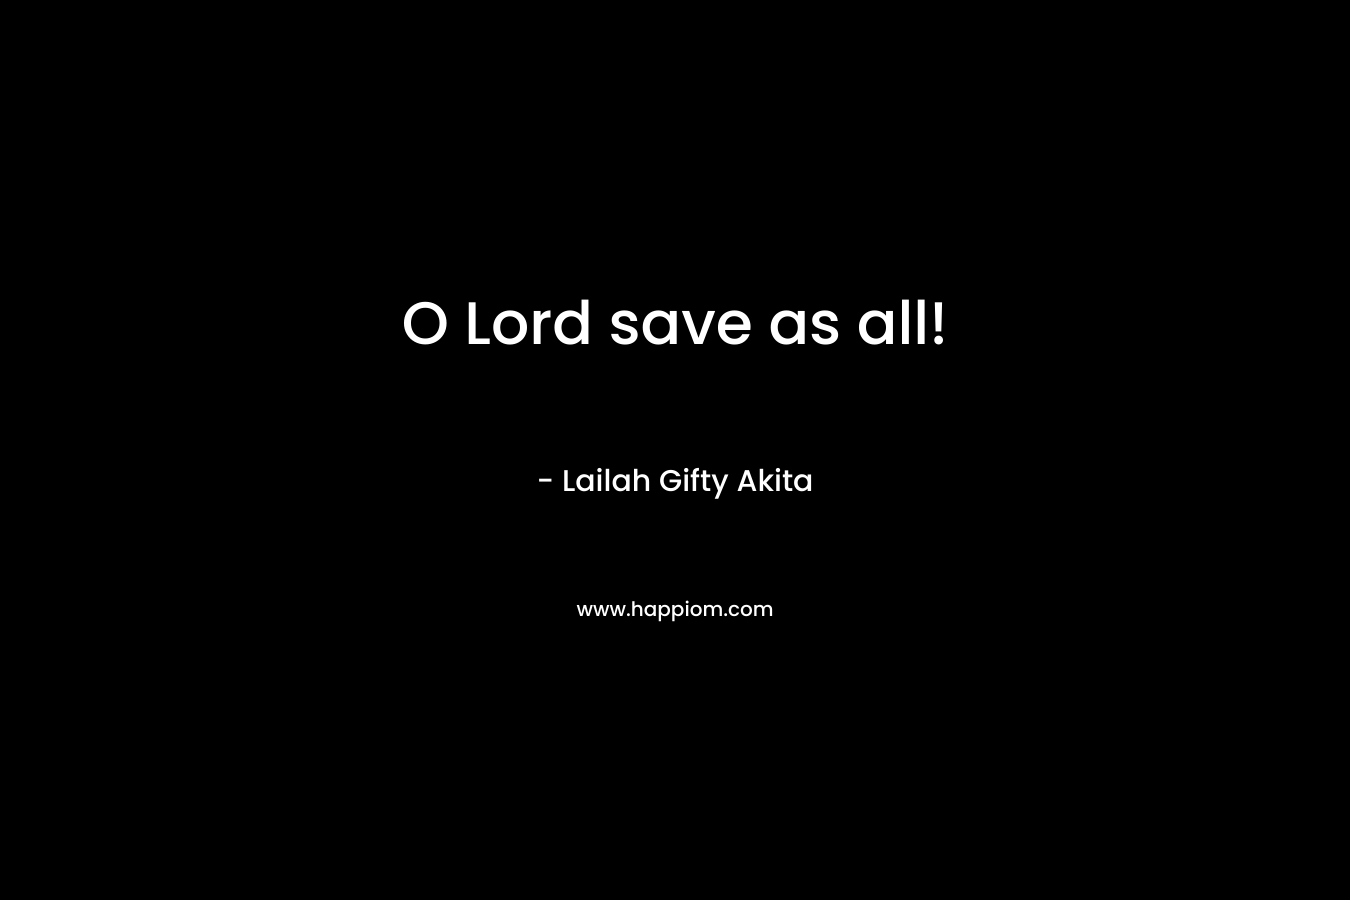 O Lord save as all!